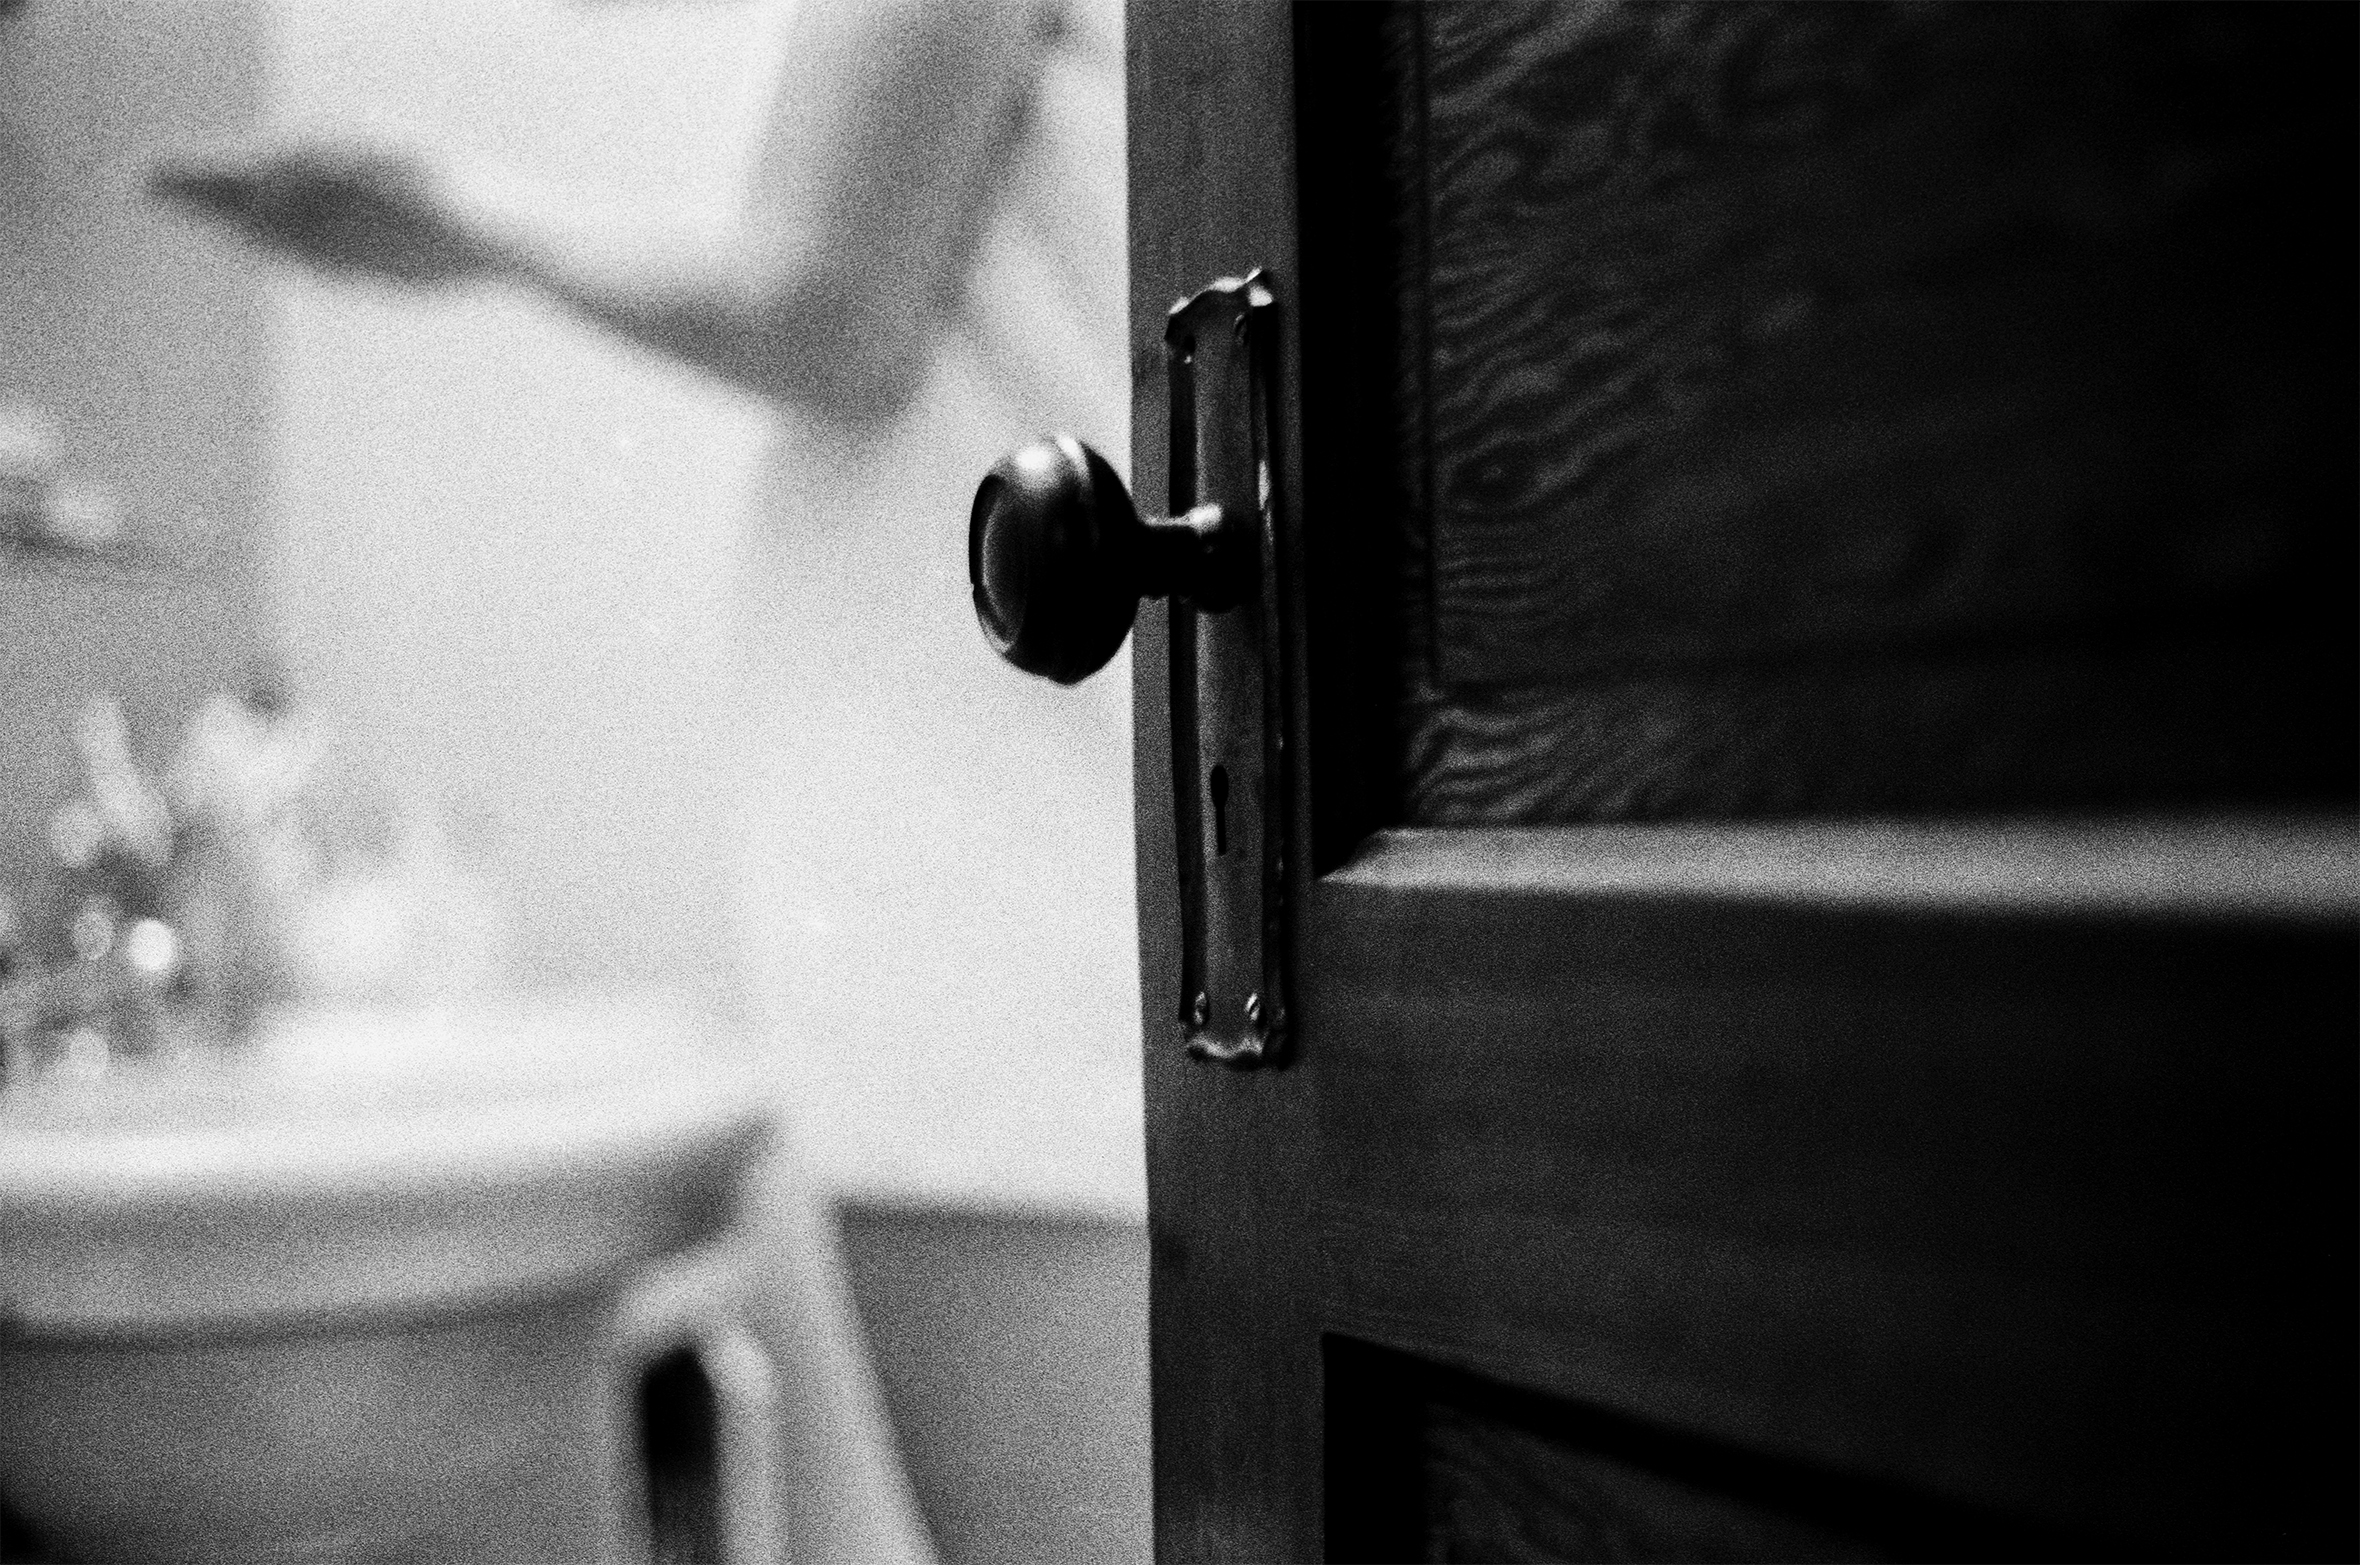 A bathroom door is cracked open. Out of focus in the background, a woman stands in front of the sink.